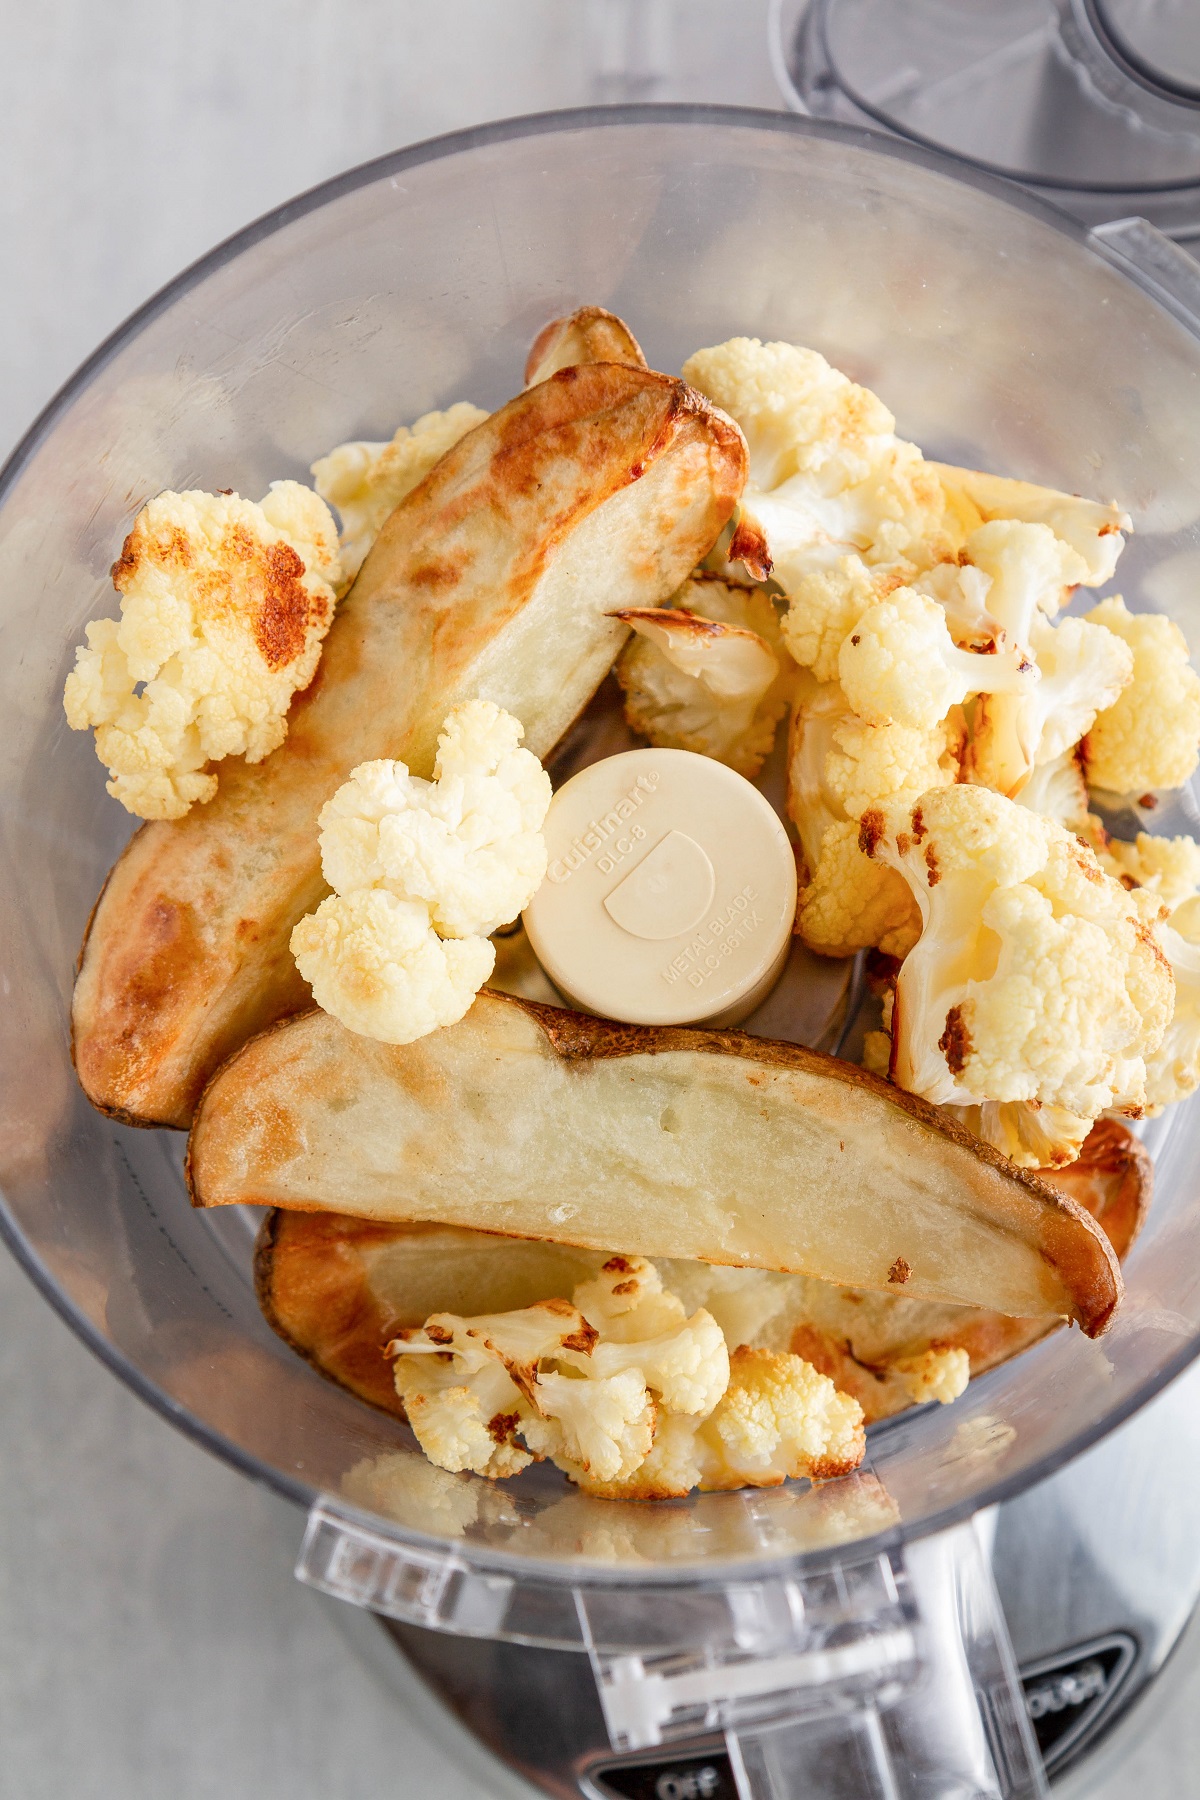 Roasted potatoes and cauliflower in a food processor, ready to be blended up for potato cakes.